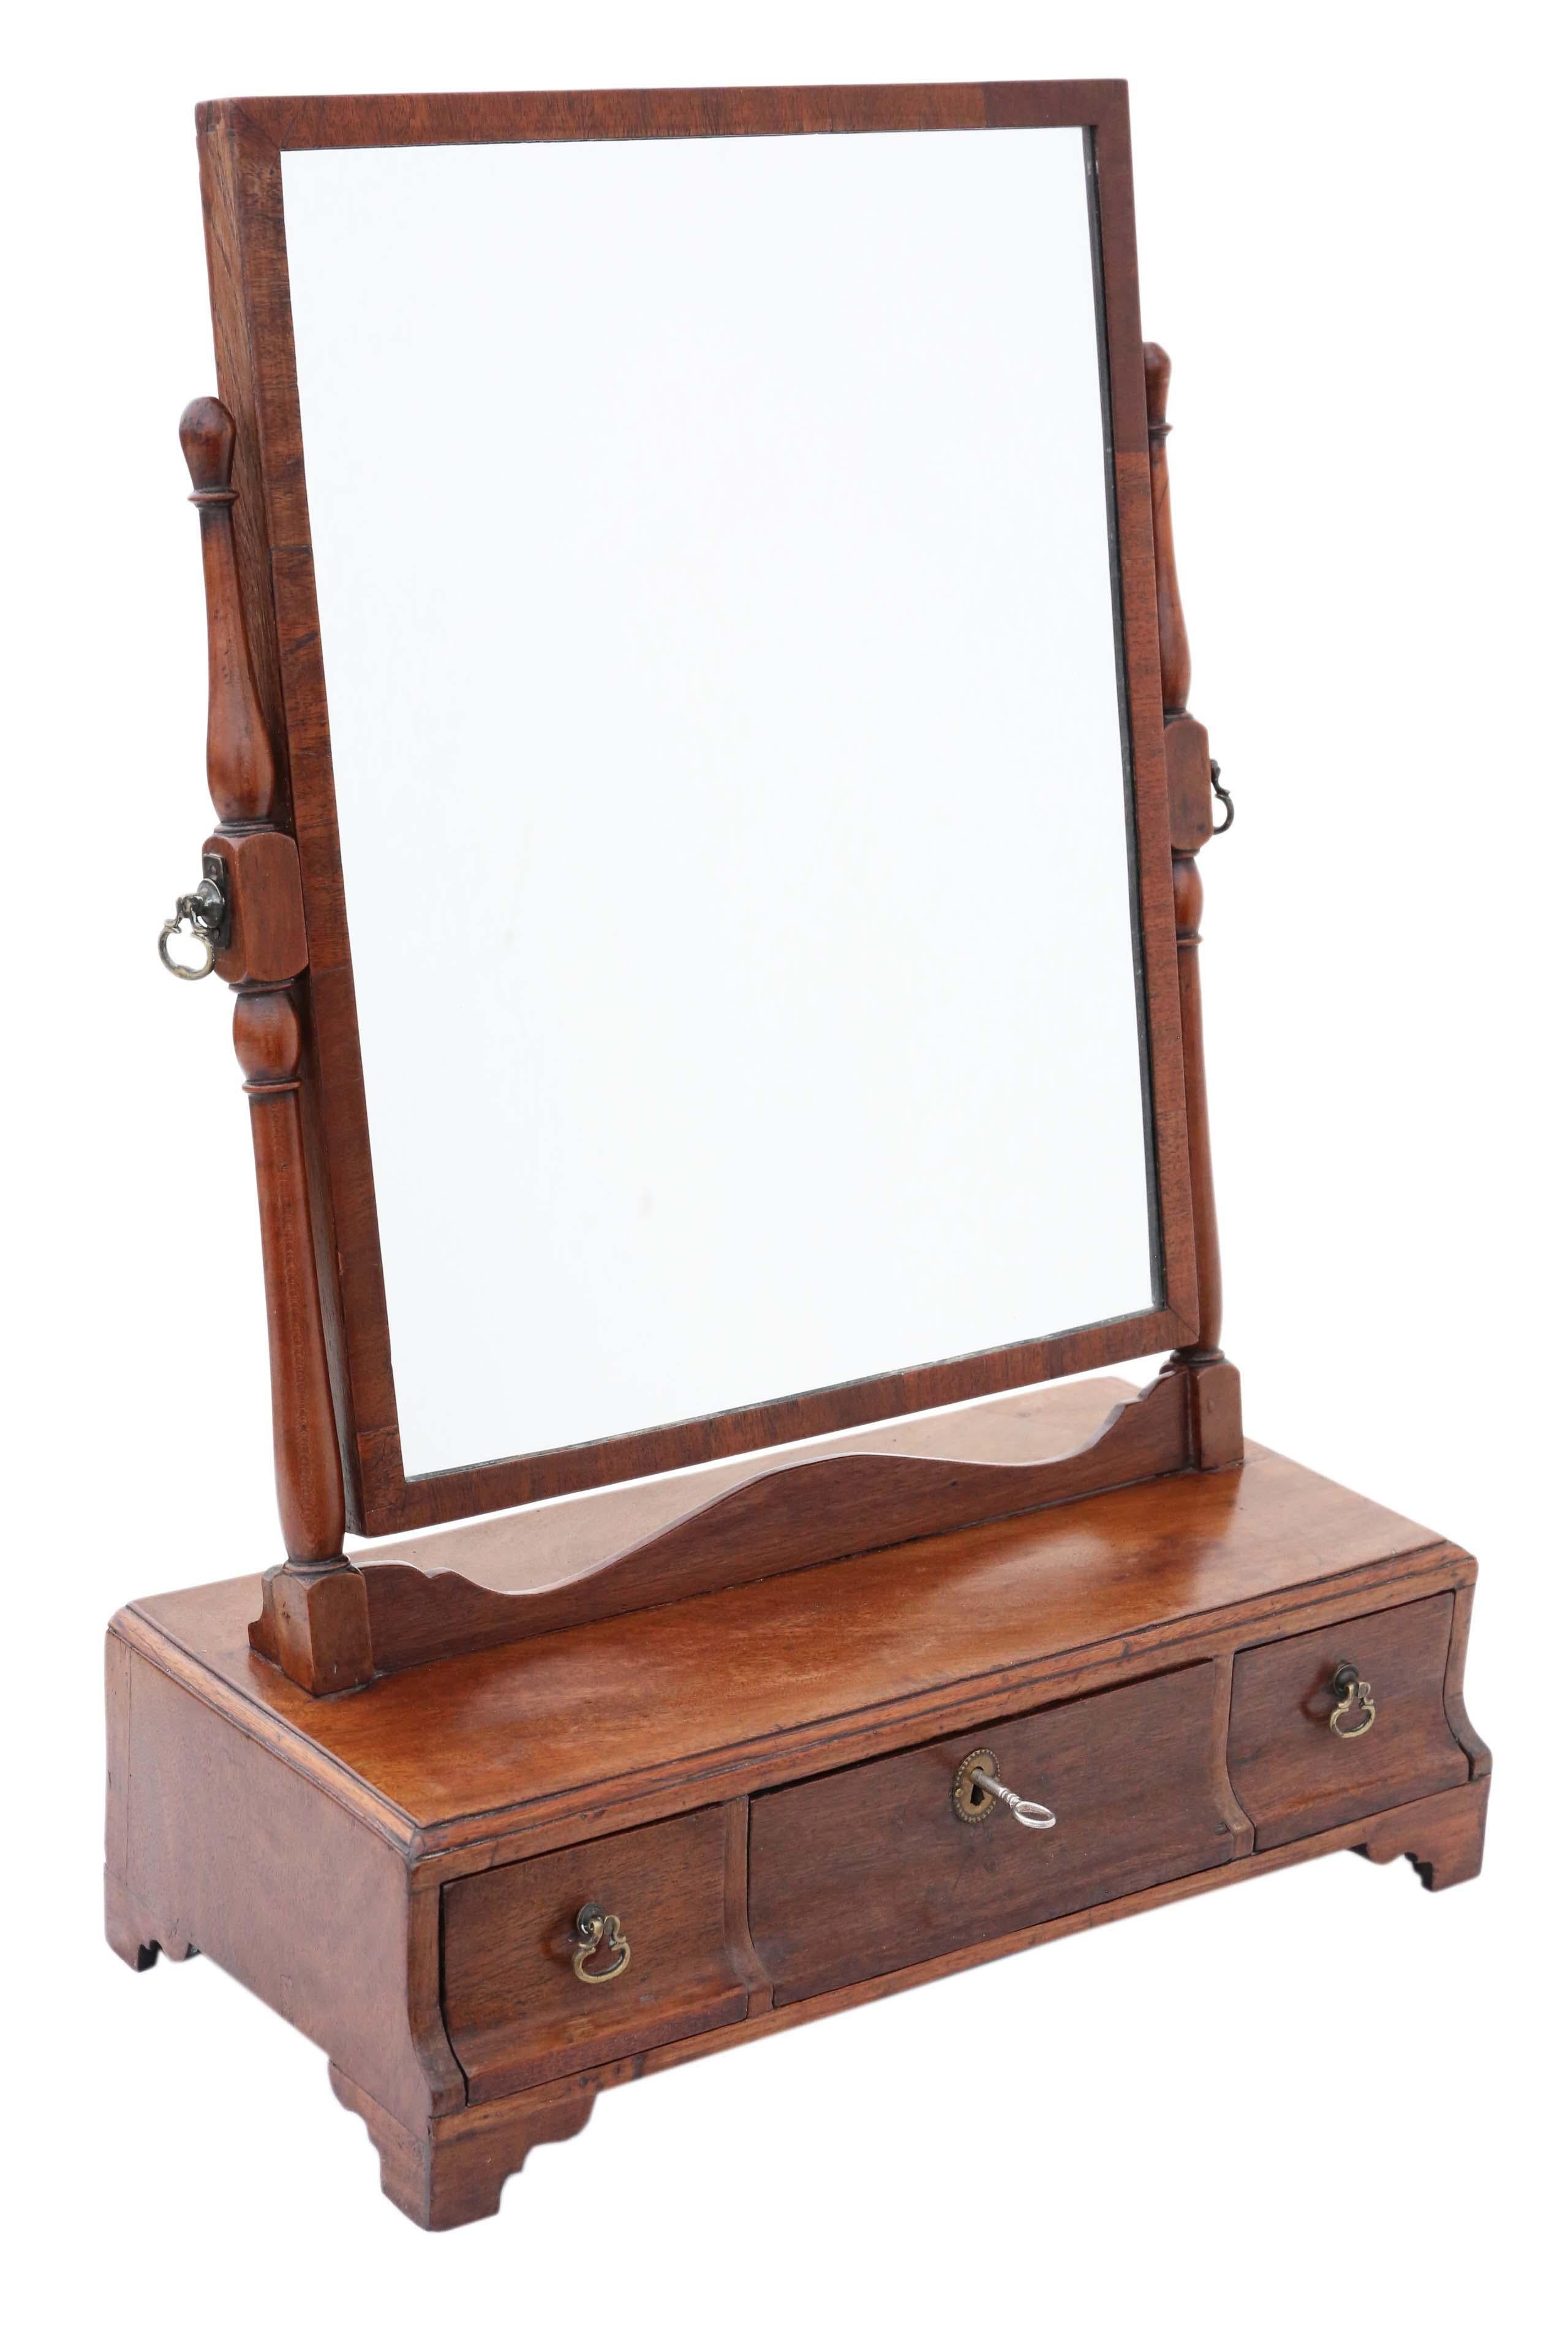 Antique quality Georgian C1820 mahogany dressing table swing mirror.

This is a lovely mirror, that is full of age and charm, with great proportions.

No loose joints. 

A rare find, that would look amazing in the right location.

The